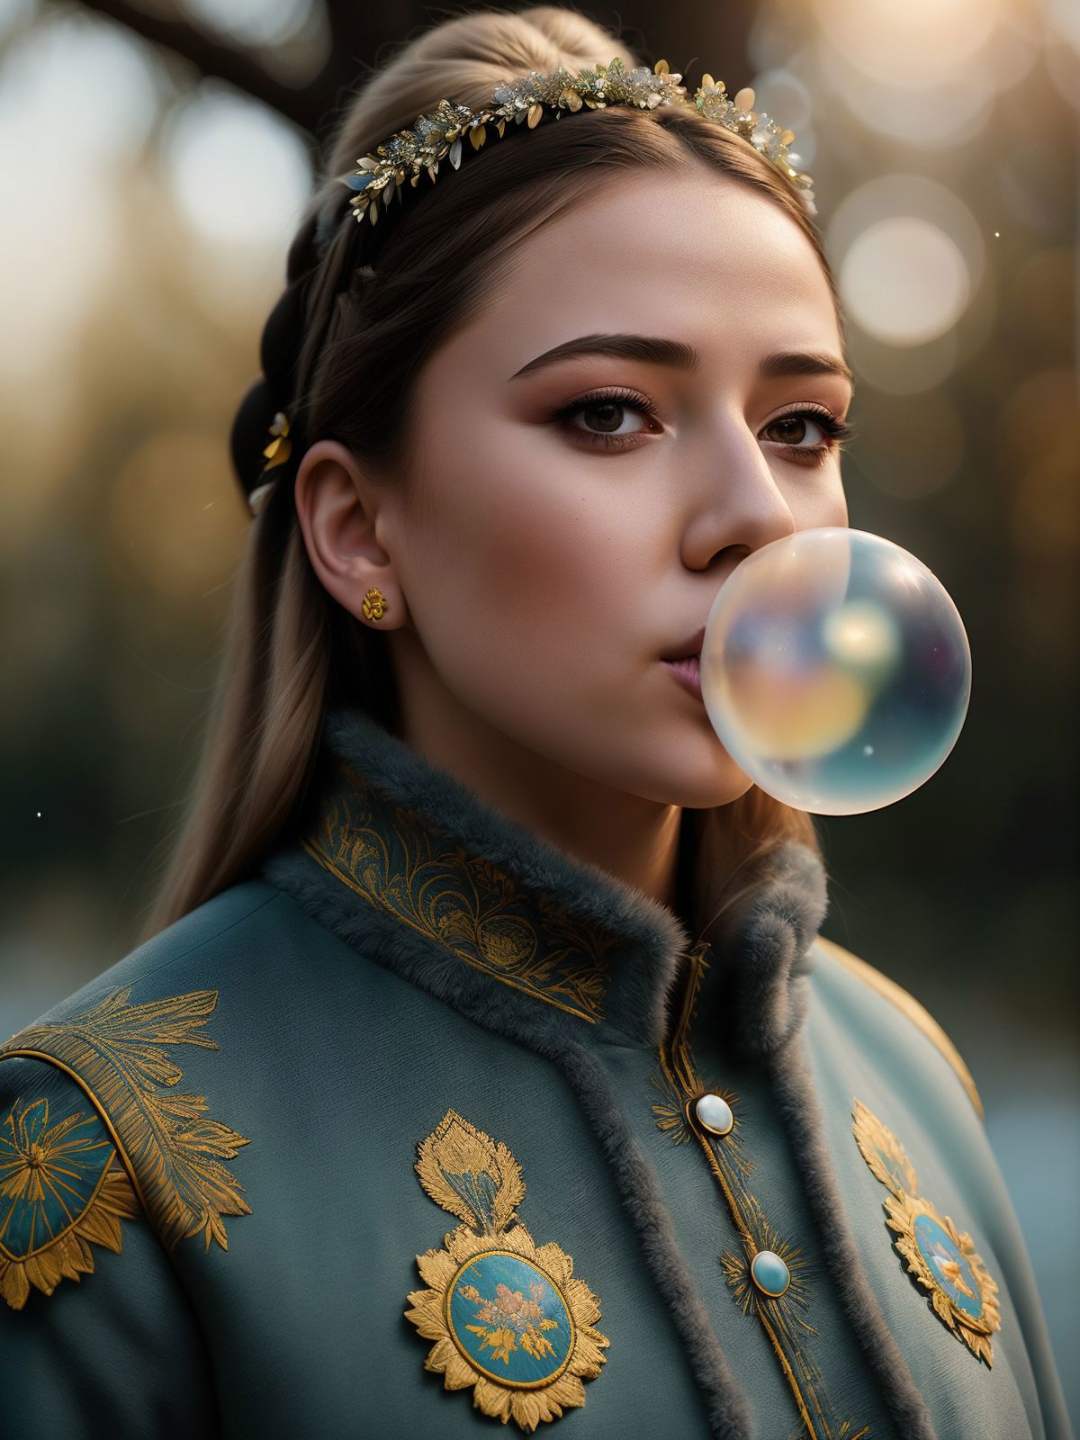 (80mm anamorphic lens flare:0,75), (artful bokeh depth of field:1.6), ((close up photorealistic portrait)), (Vladimir Zelenskyin Ukrainian blow bubble gum. vyshyvanka outfit, walks proudly above the water surface:1.4), the mermaids with realistic blond hair, long braids), with delight face expressions looking at walking above the water surface Jesus, (detailed professional photography:1.3), (dark shot:1.2),(cinematic scar on face:0.88), (realistic sweat skin:1.2), (tree on background:1.1), (bent in flowers scene:1.2), Ukrainian folklore composition, (sunflowers on background:0.81), (blue fur coat:0,88), (outfit yellow and blue color tone), (hdr:1.28), hyperdetailed, cinematic, accent warm light, cold background color tone, intricate details, hyperrealistic, (muted colors:1.38), (neutral colors:1.2), intricate, elegant, sharp focus, (Geof Darrow:1,2), soft lighting, vibrant colors, (high contrast), (masterpiece), (detailed face). <lora:Bubble Gum_v2.0:0.6>